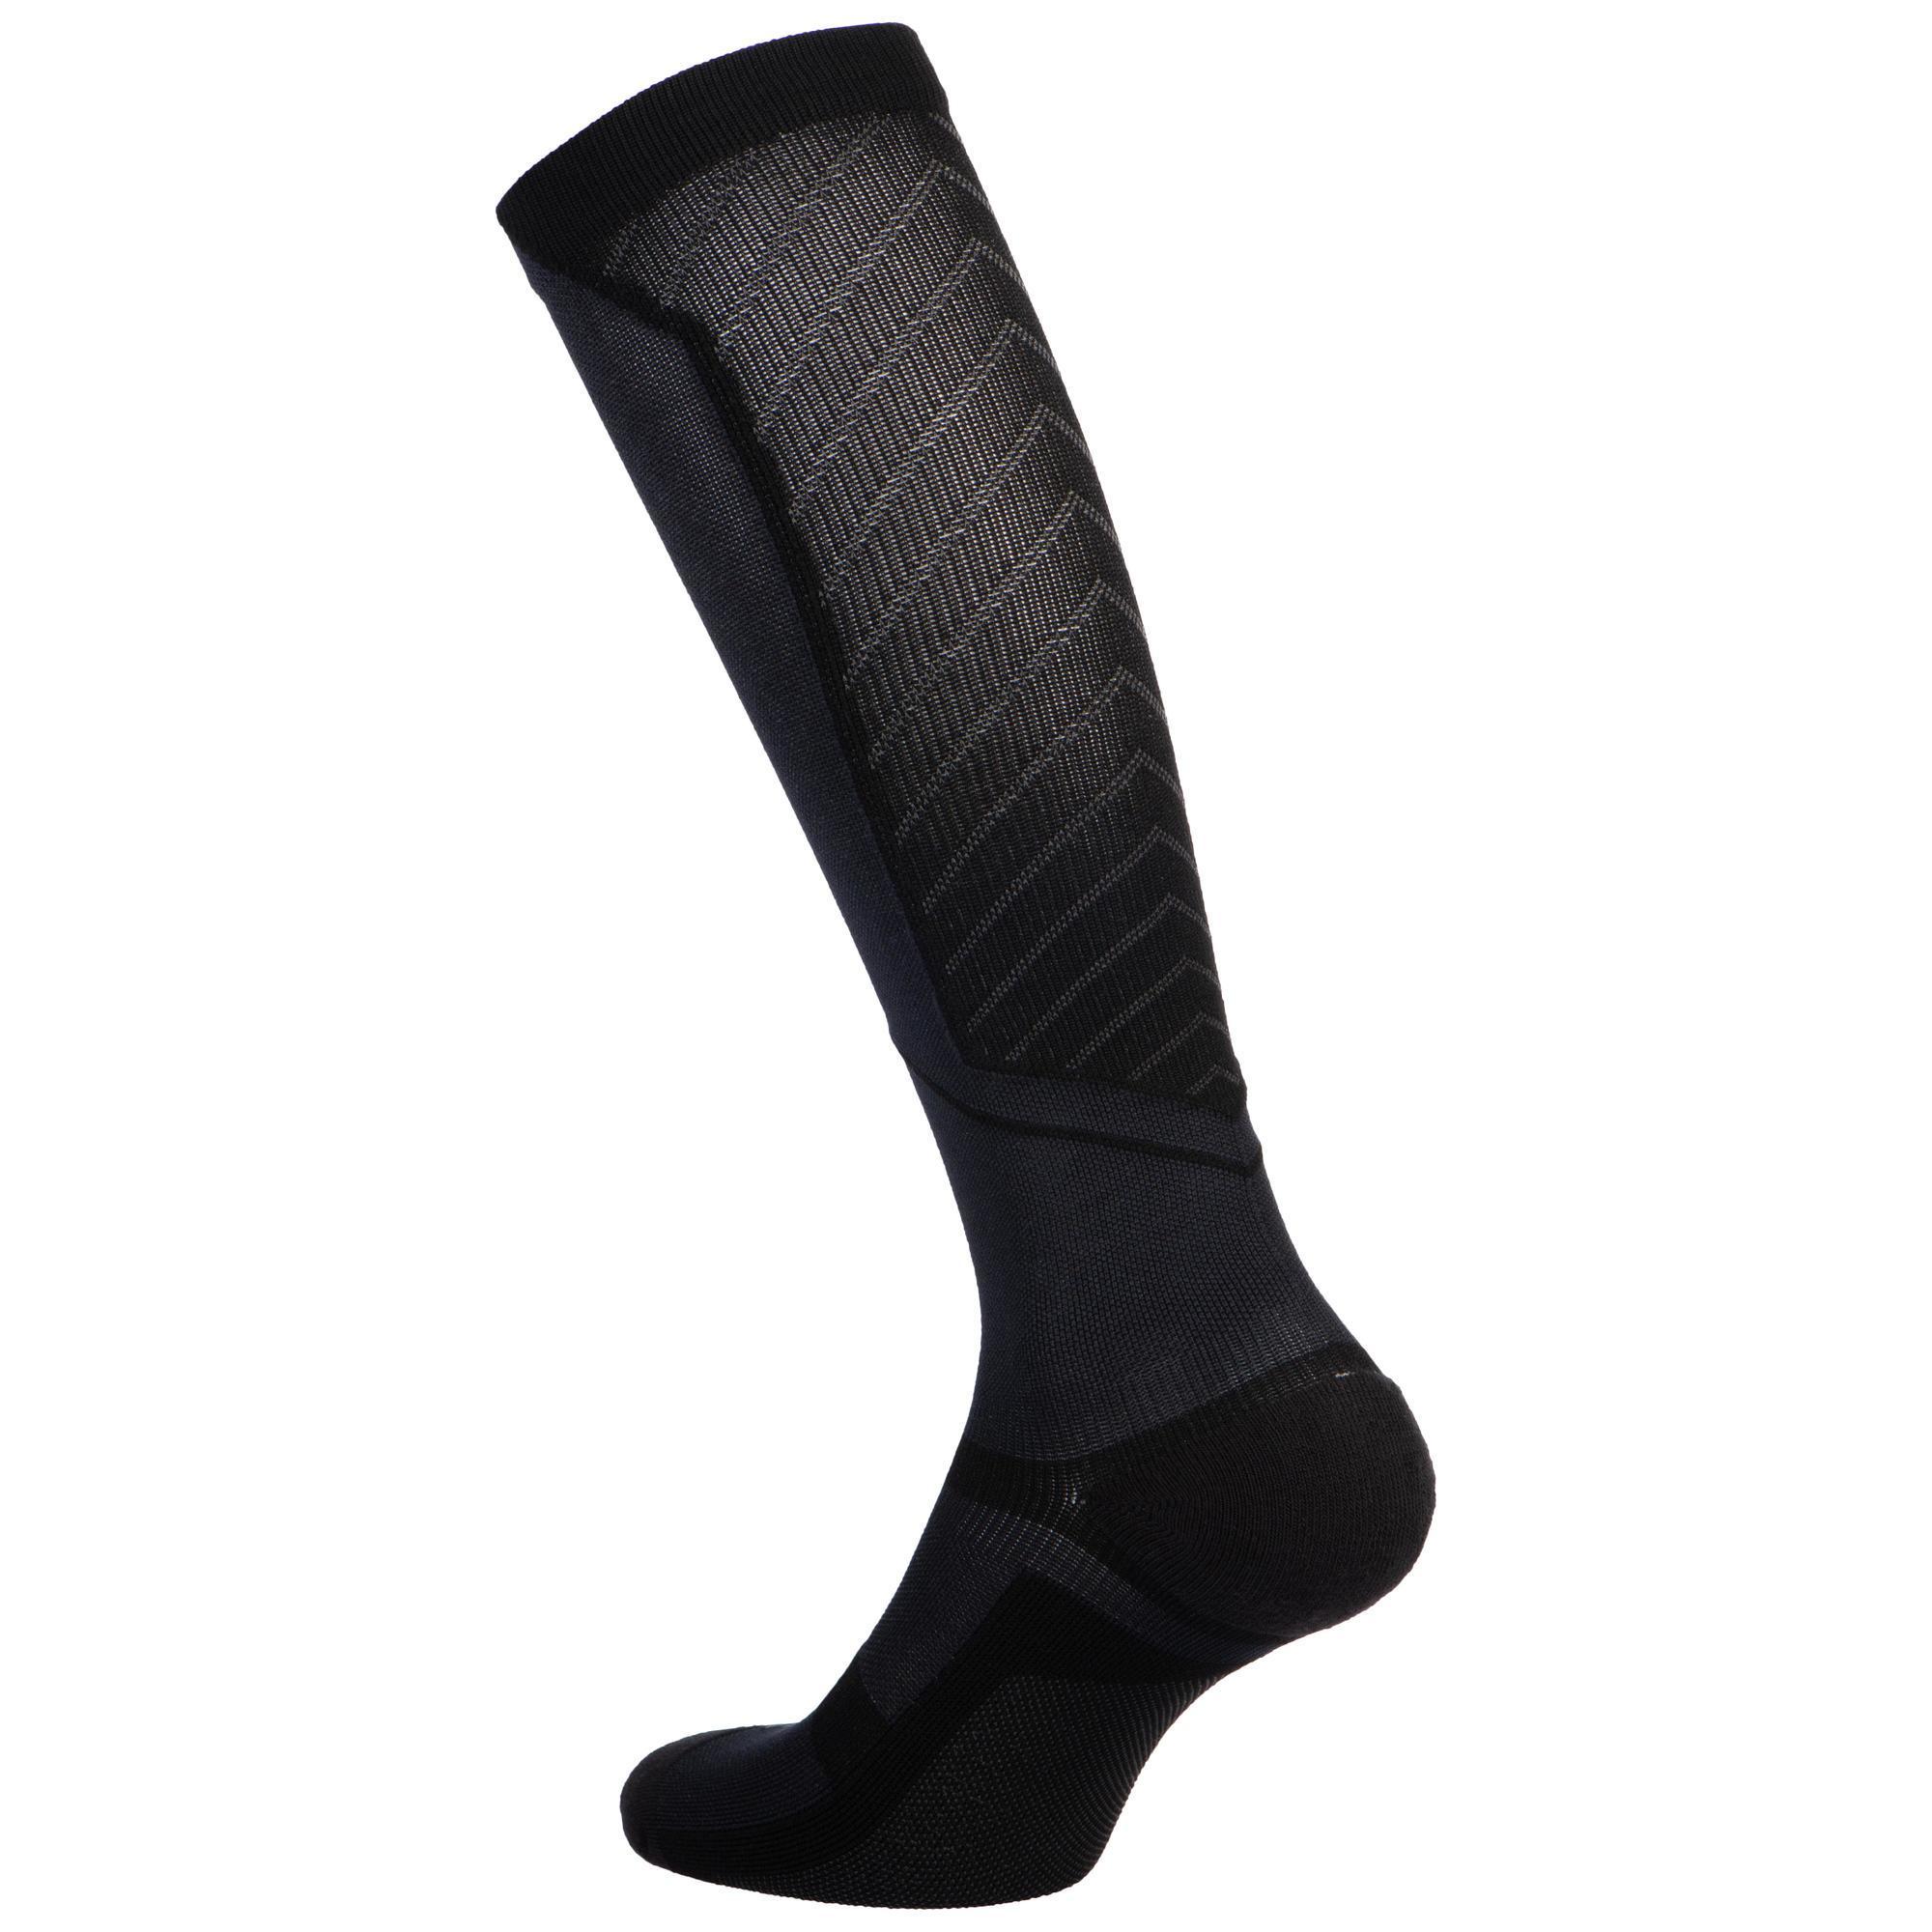 RECOVERY COMPRESSION SOCK - BLACK 